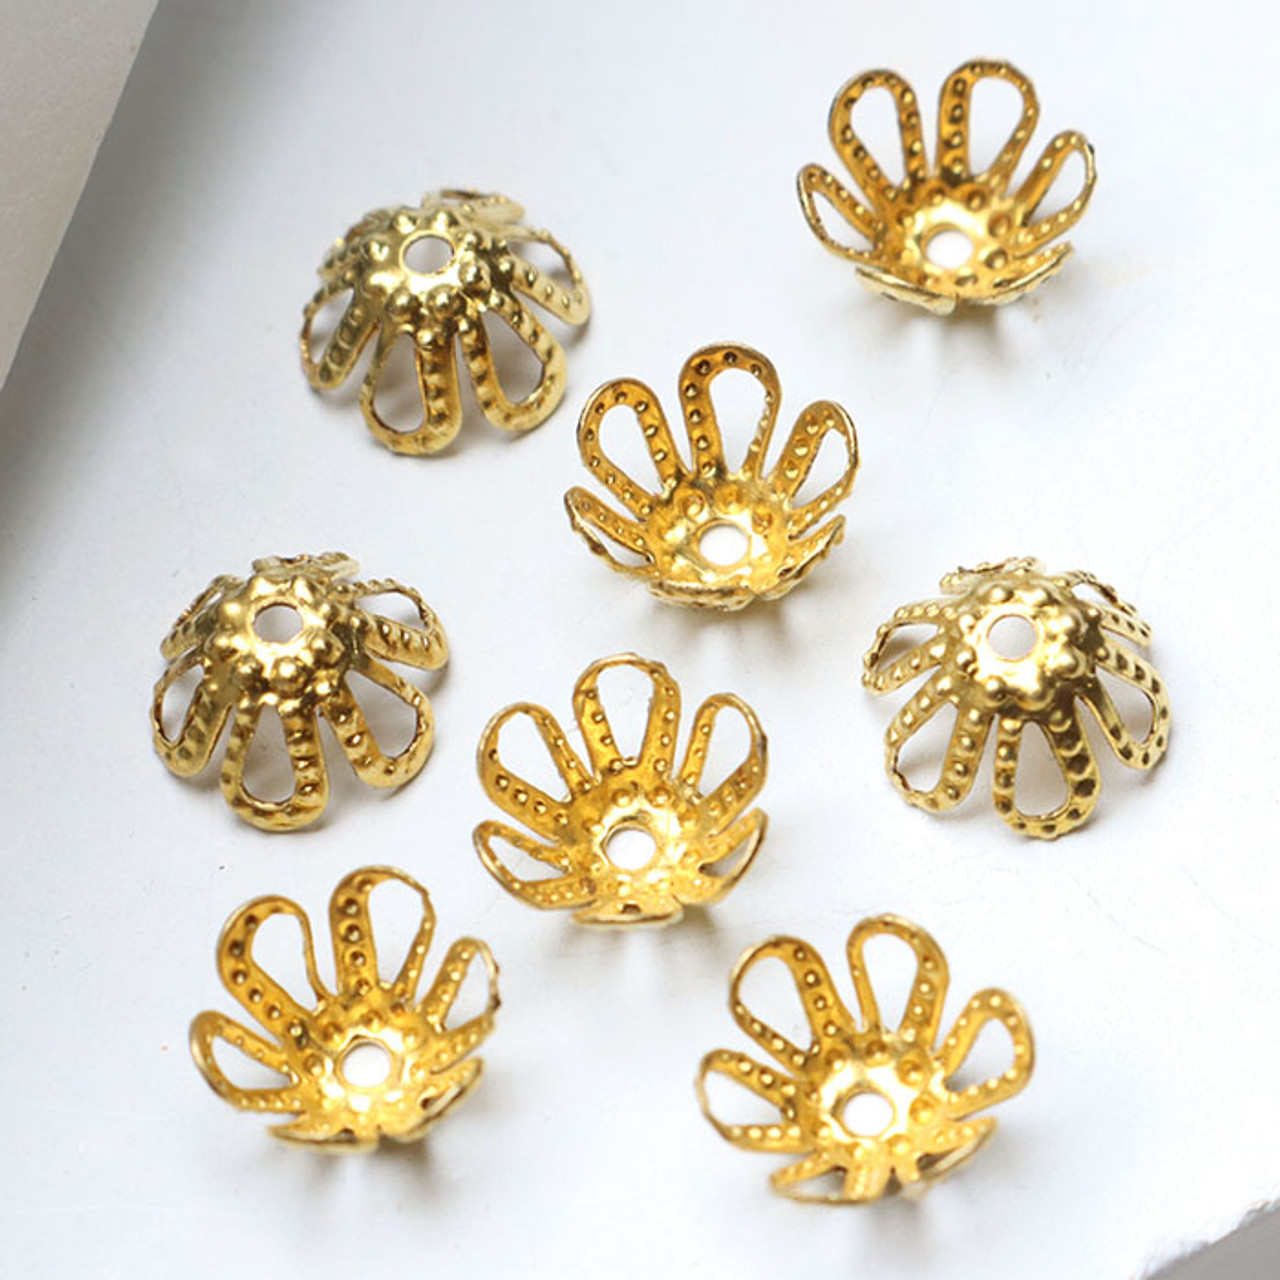 8x6mm Filigree Flower Bead Caps, Silver Tone - Golden Age Beads